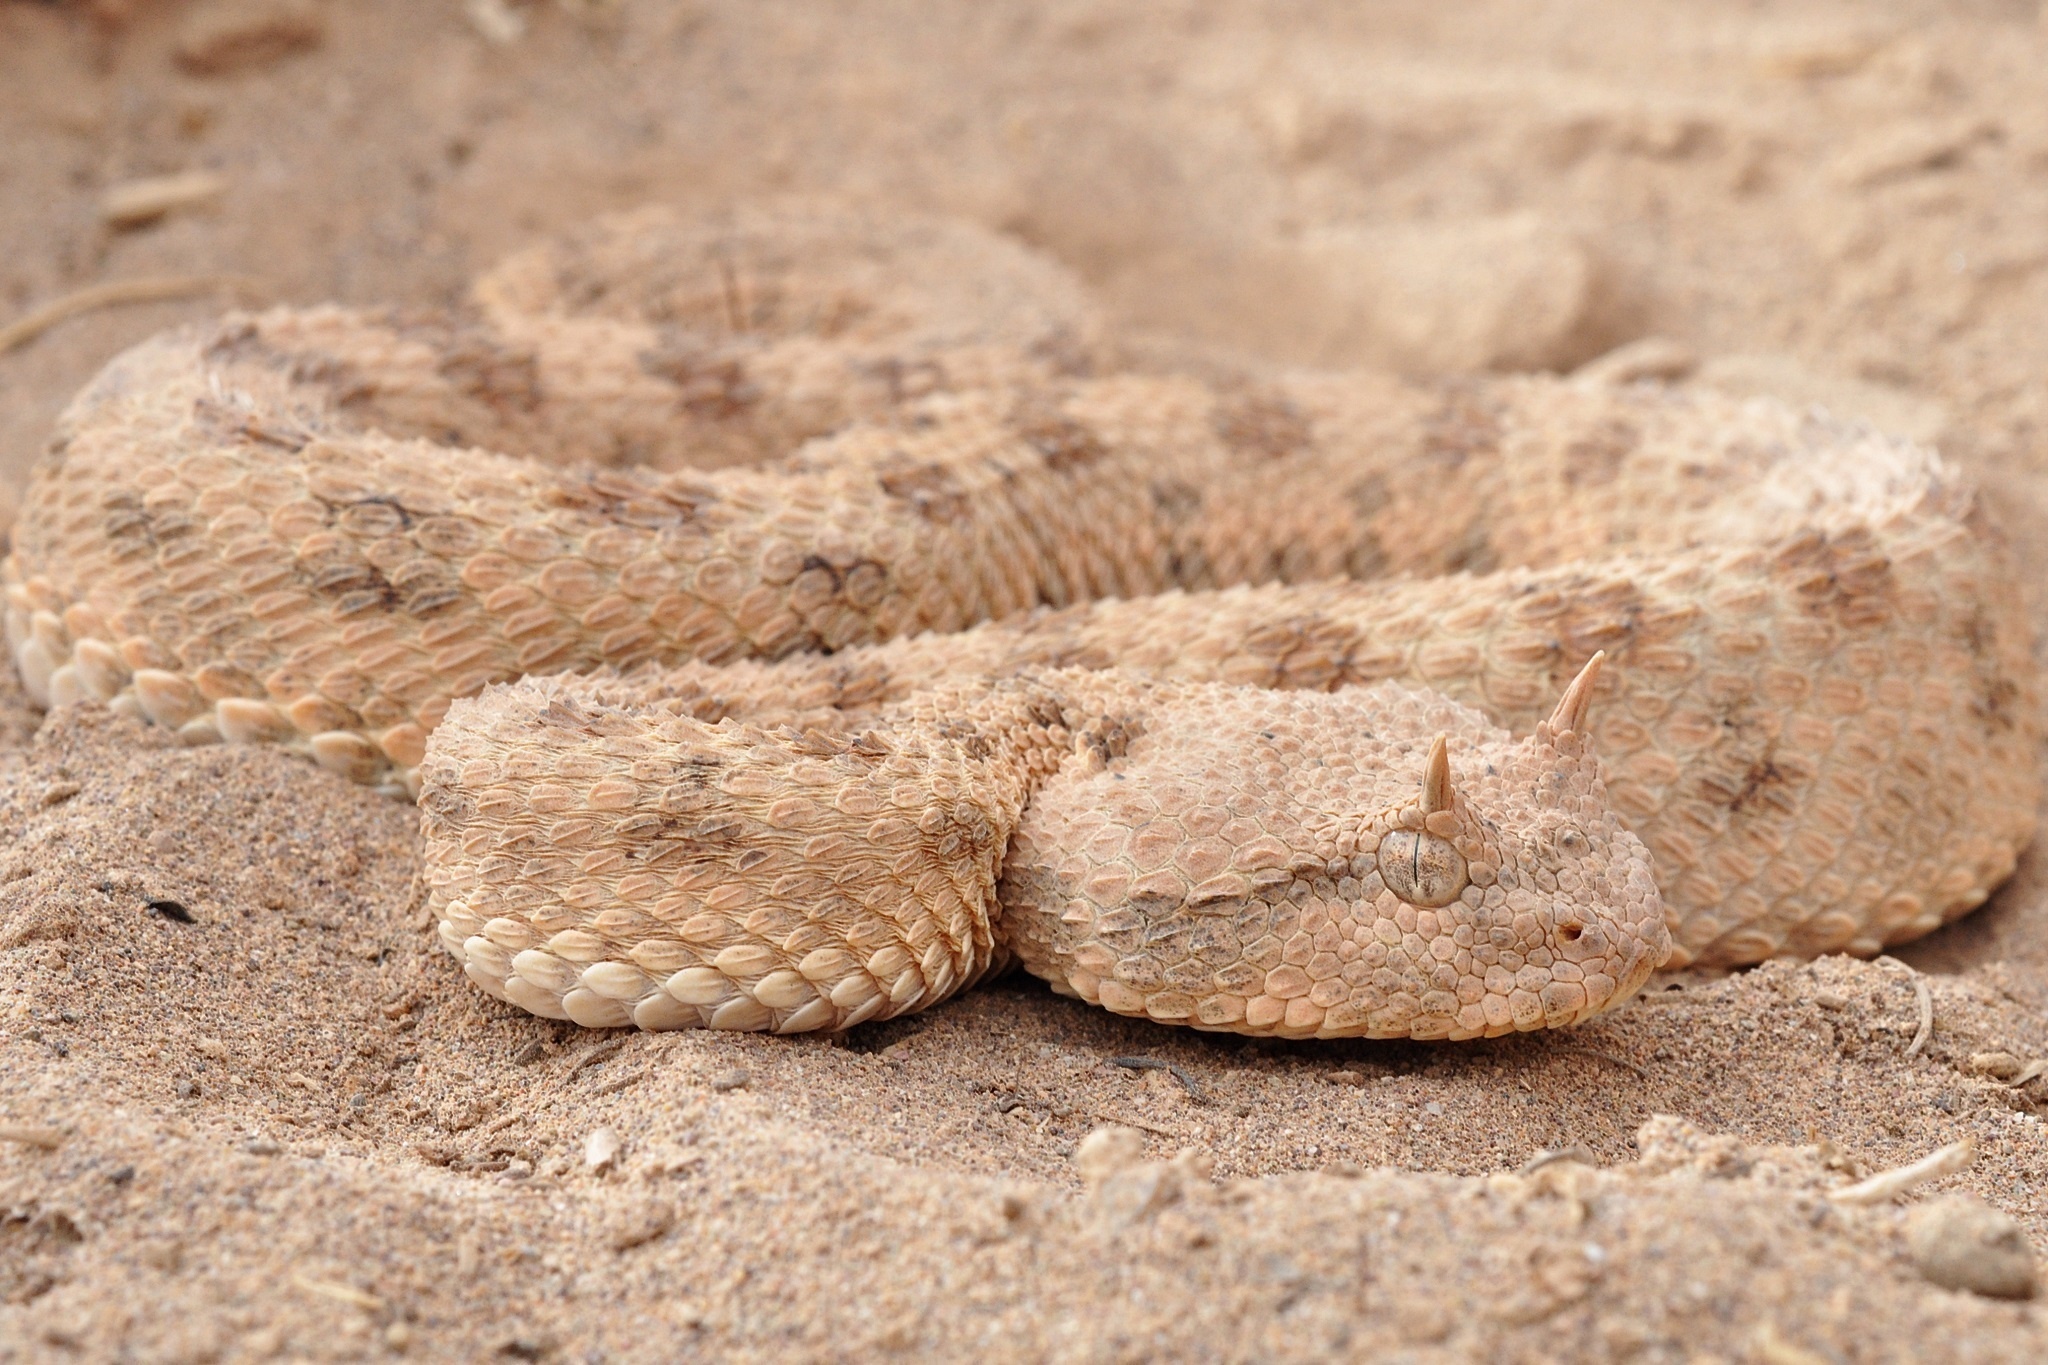 General 2048x1365 animals reptiles snake closeup scales ground